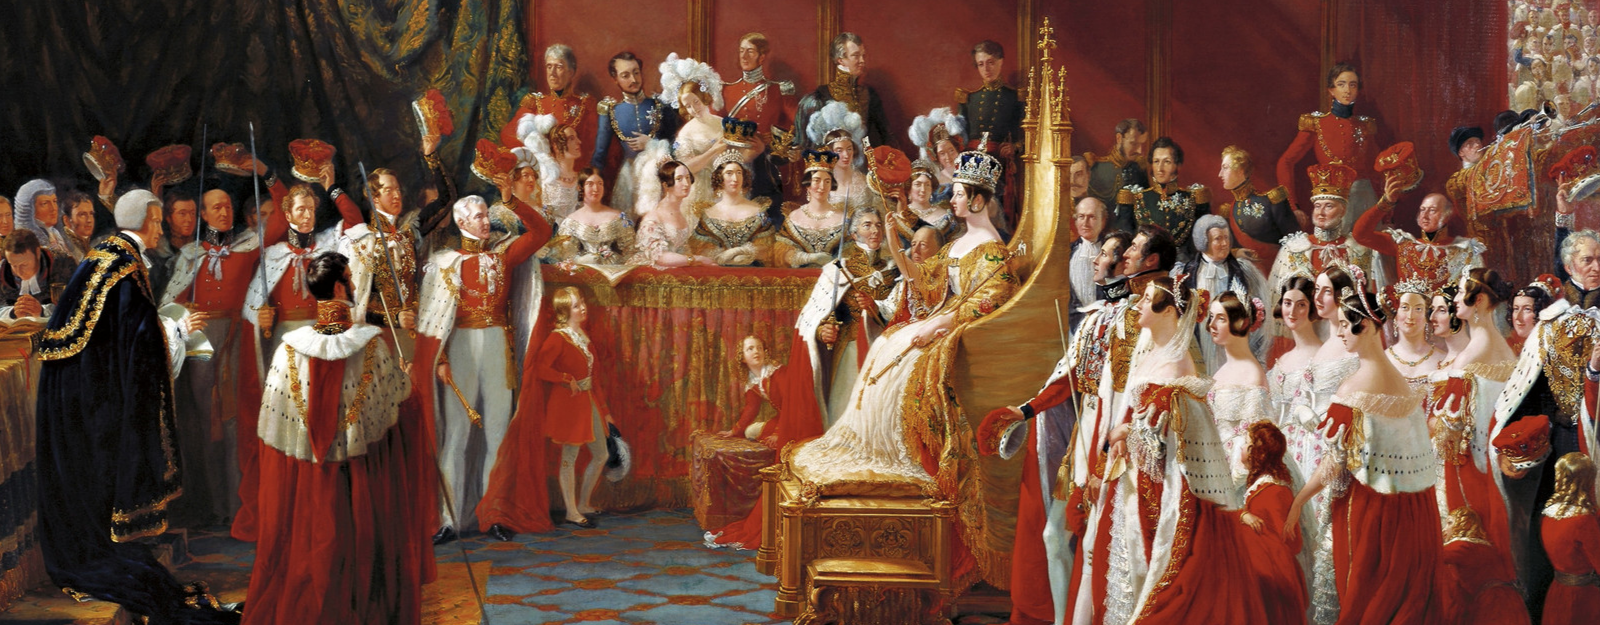 Painting of Queen Victoria at her coronation